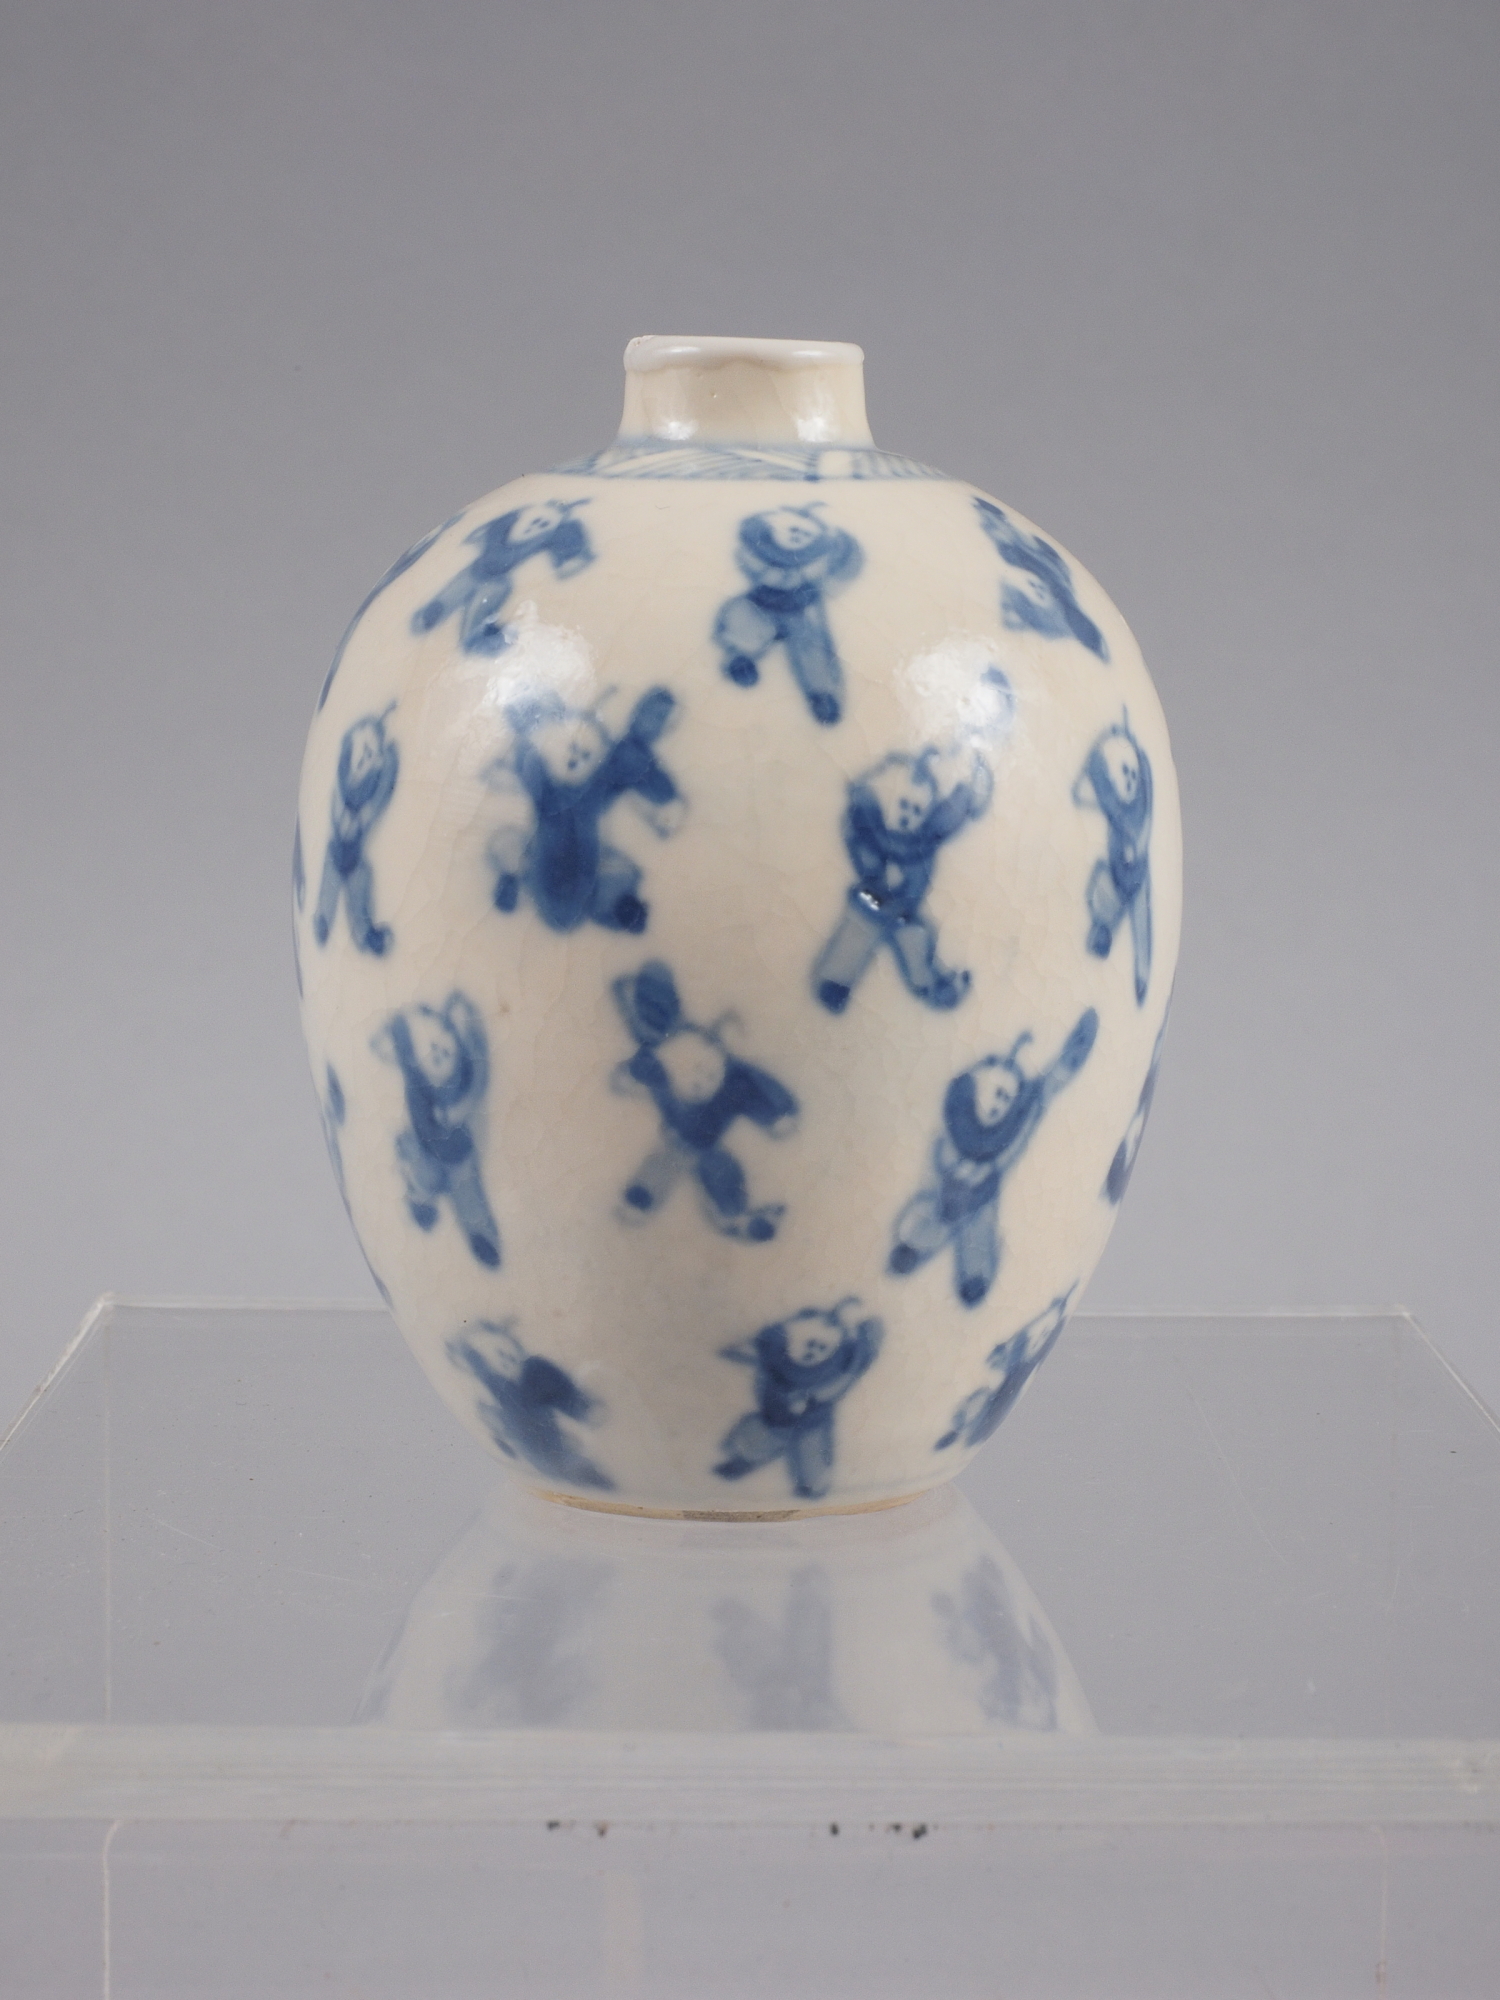 A Chinese blue and white figure decorated oviform vase with six-character mark, 2 3/4" high, on